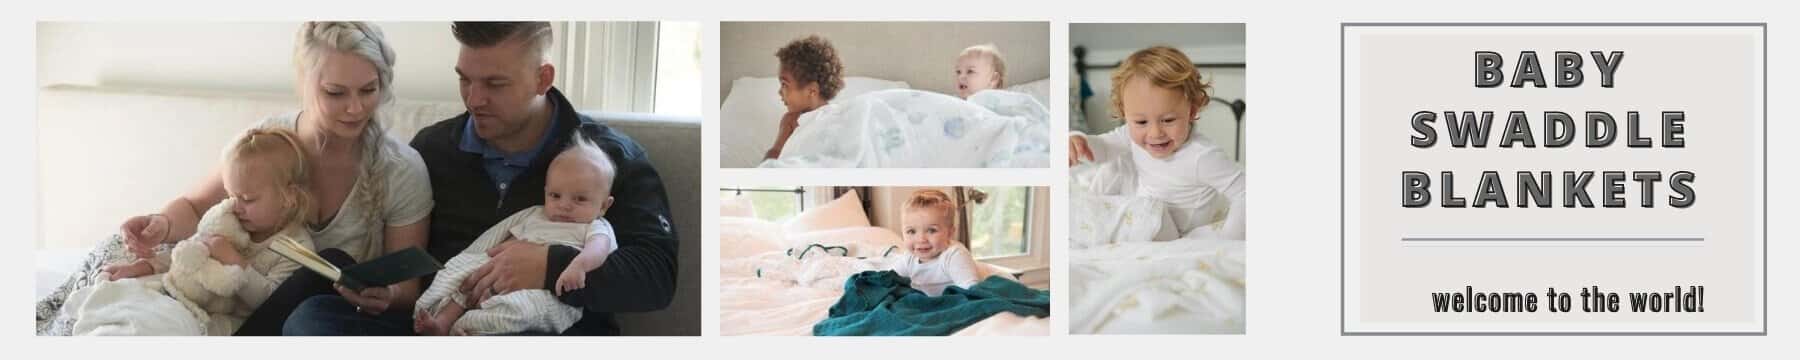 Banner Swaddle Blankets Collection - Roll Up Baby